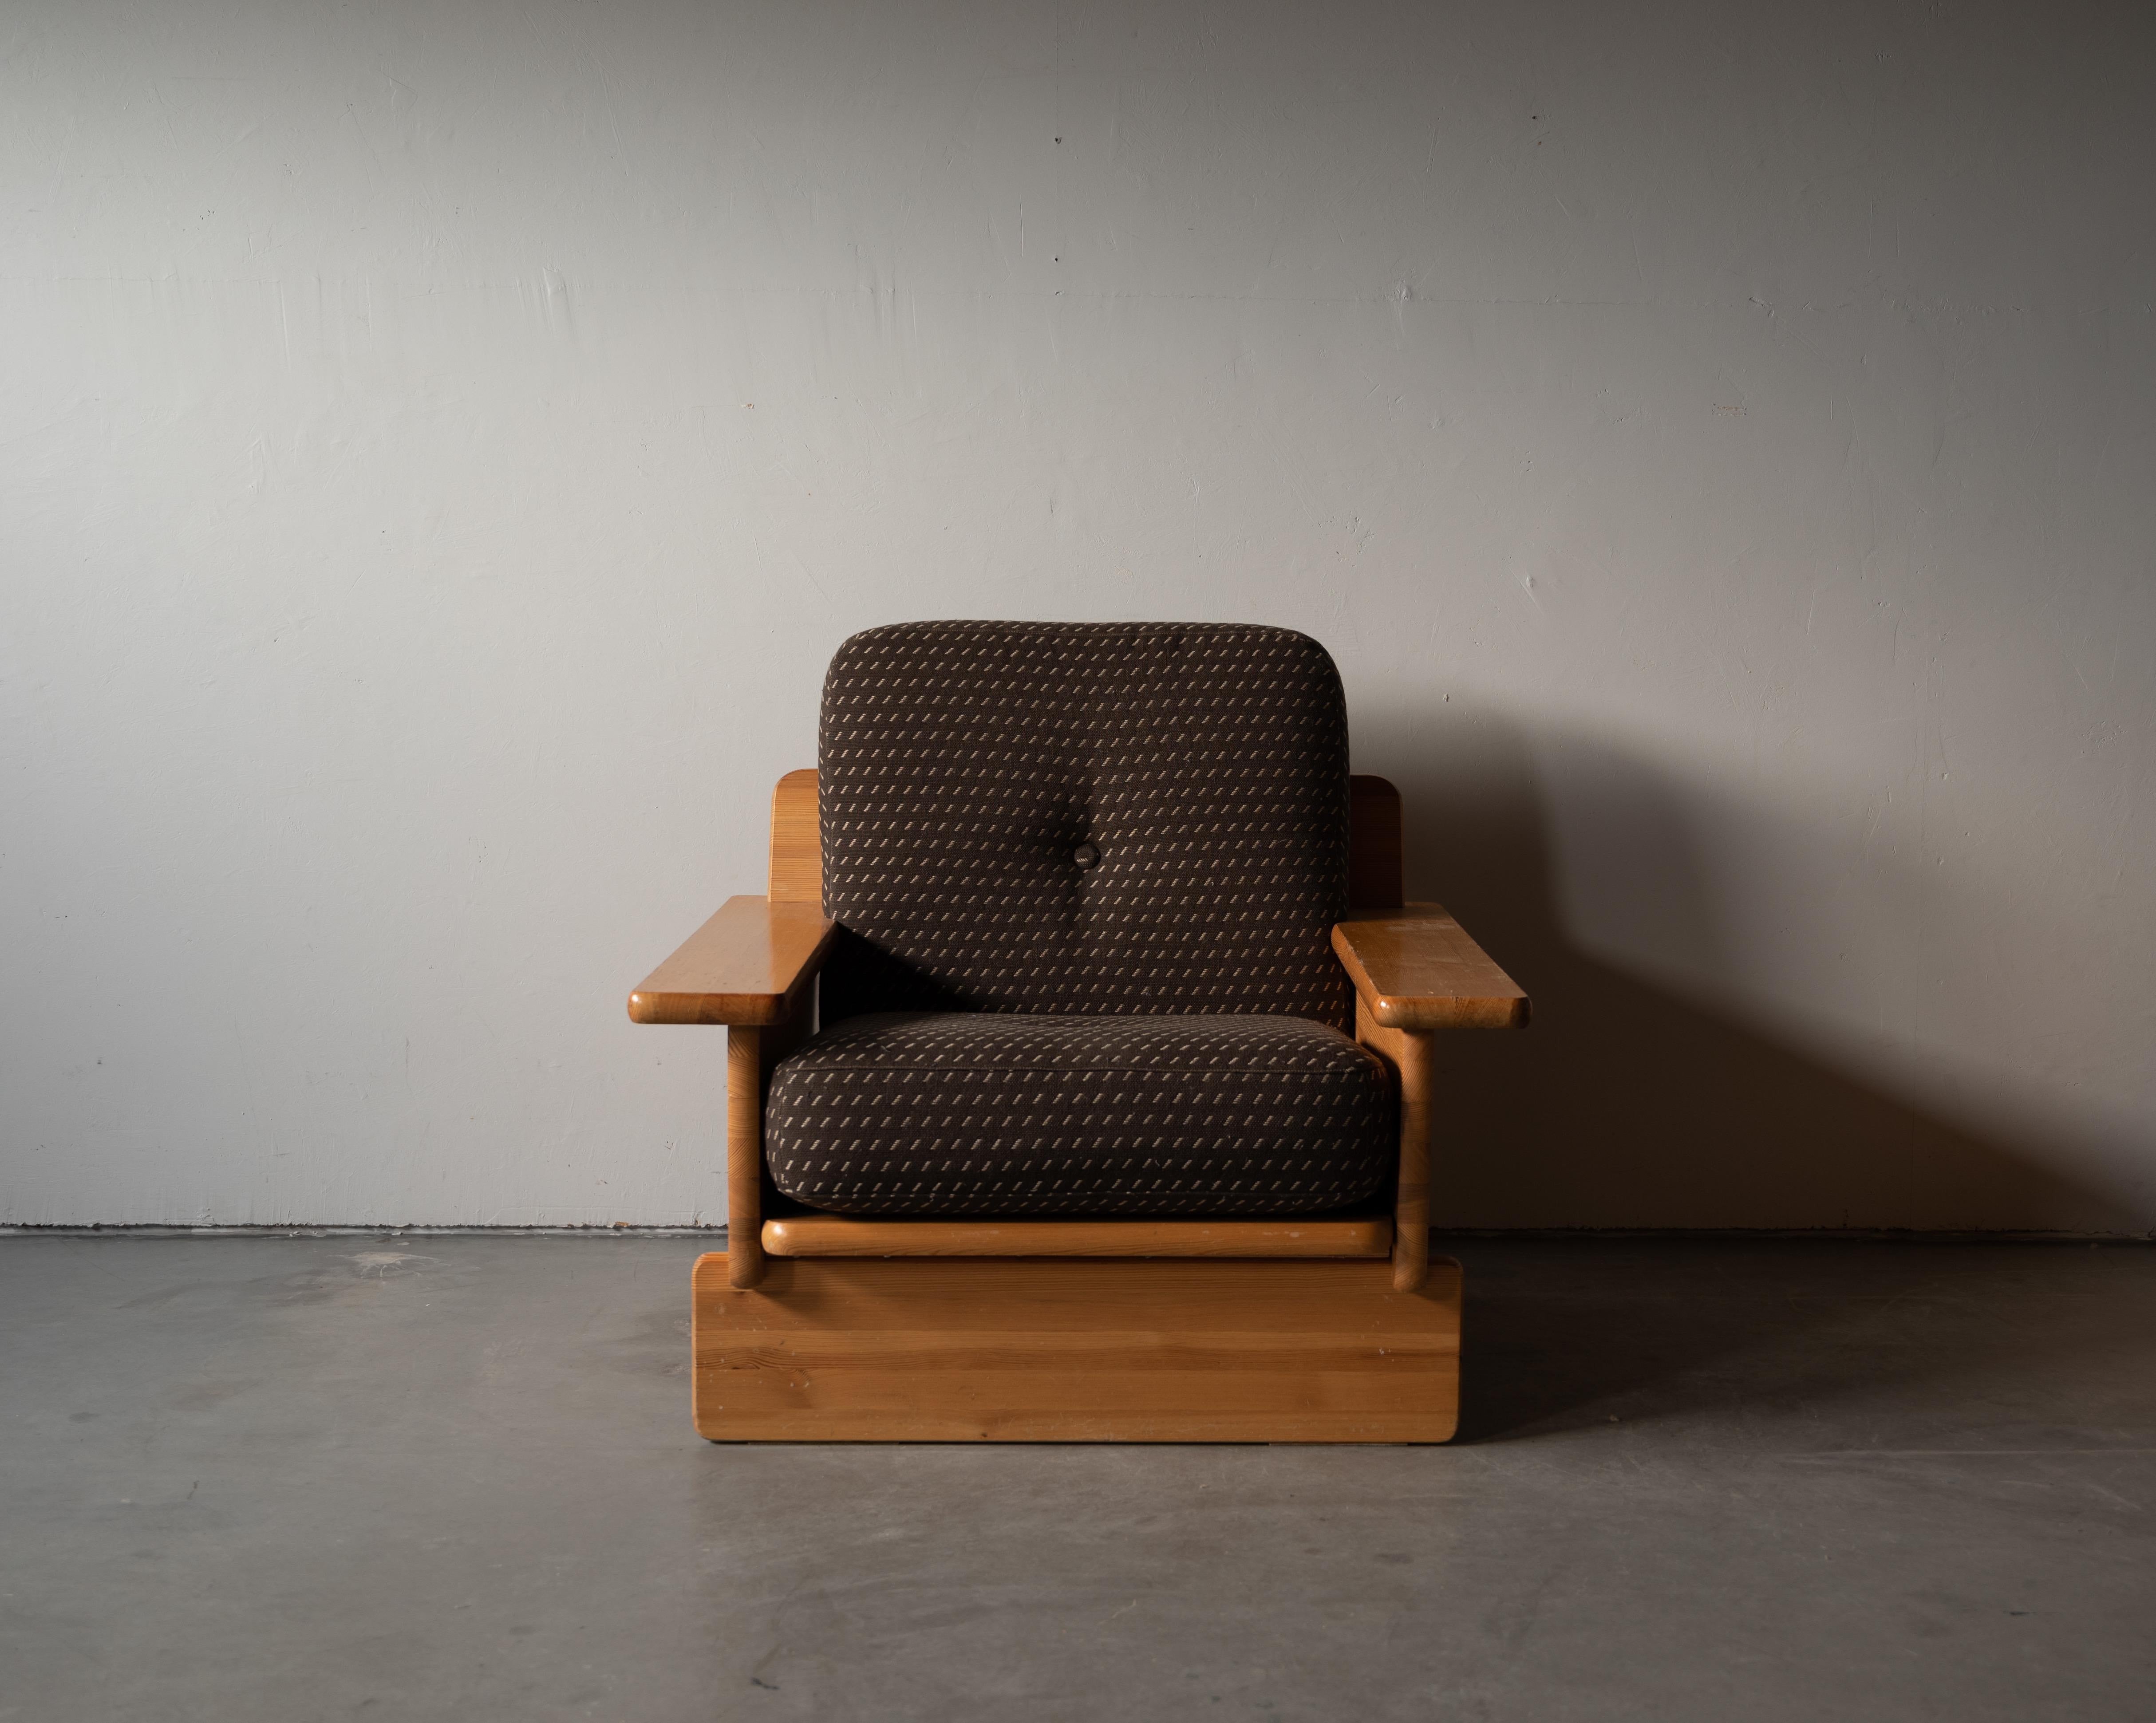 Mid-20th Century Swedish Cabinetmaker, Lounge Chairs, Solid Pine, Brown Fabric, Finland, c. 1970s For Sale